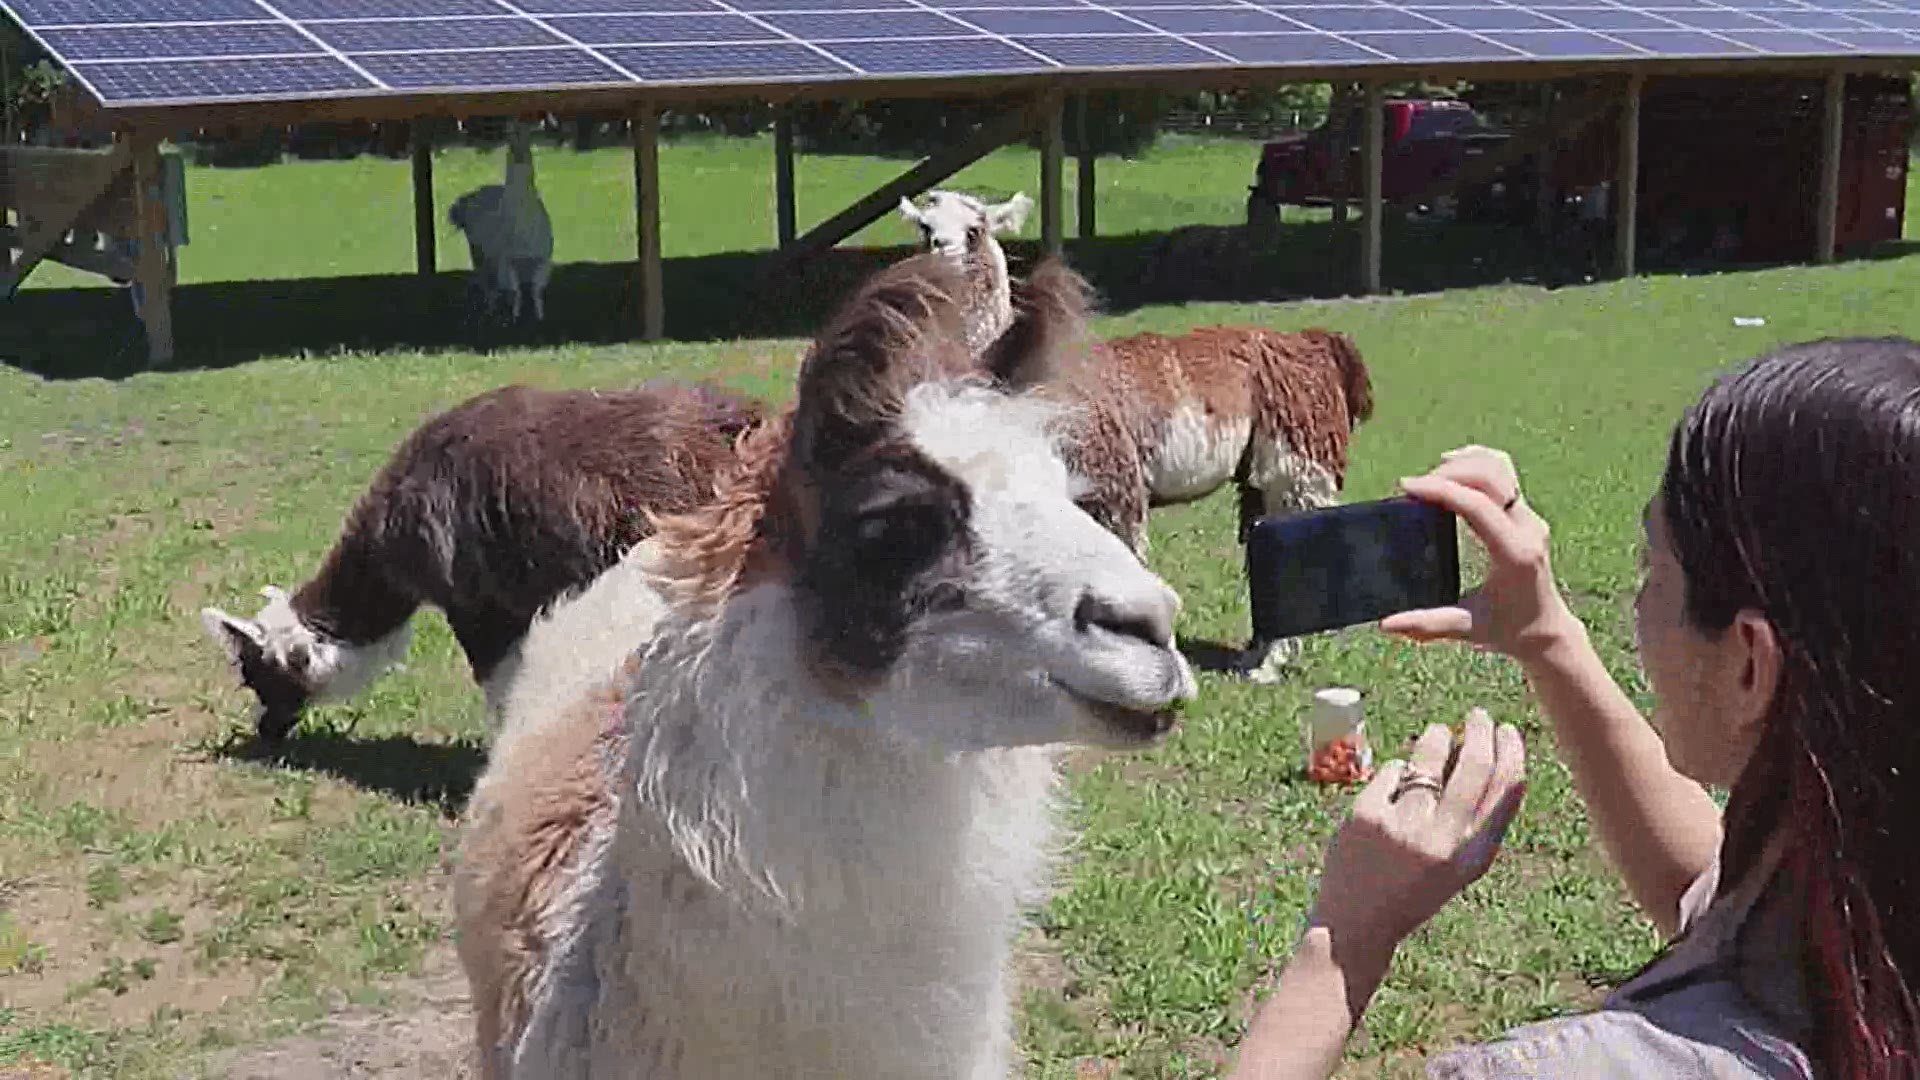 This llama business is thinking outside the box to help people smile during social distancing.